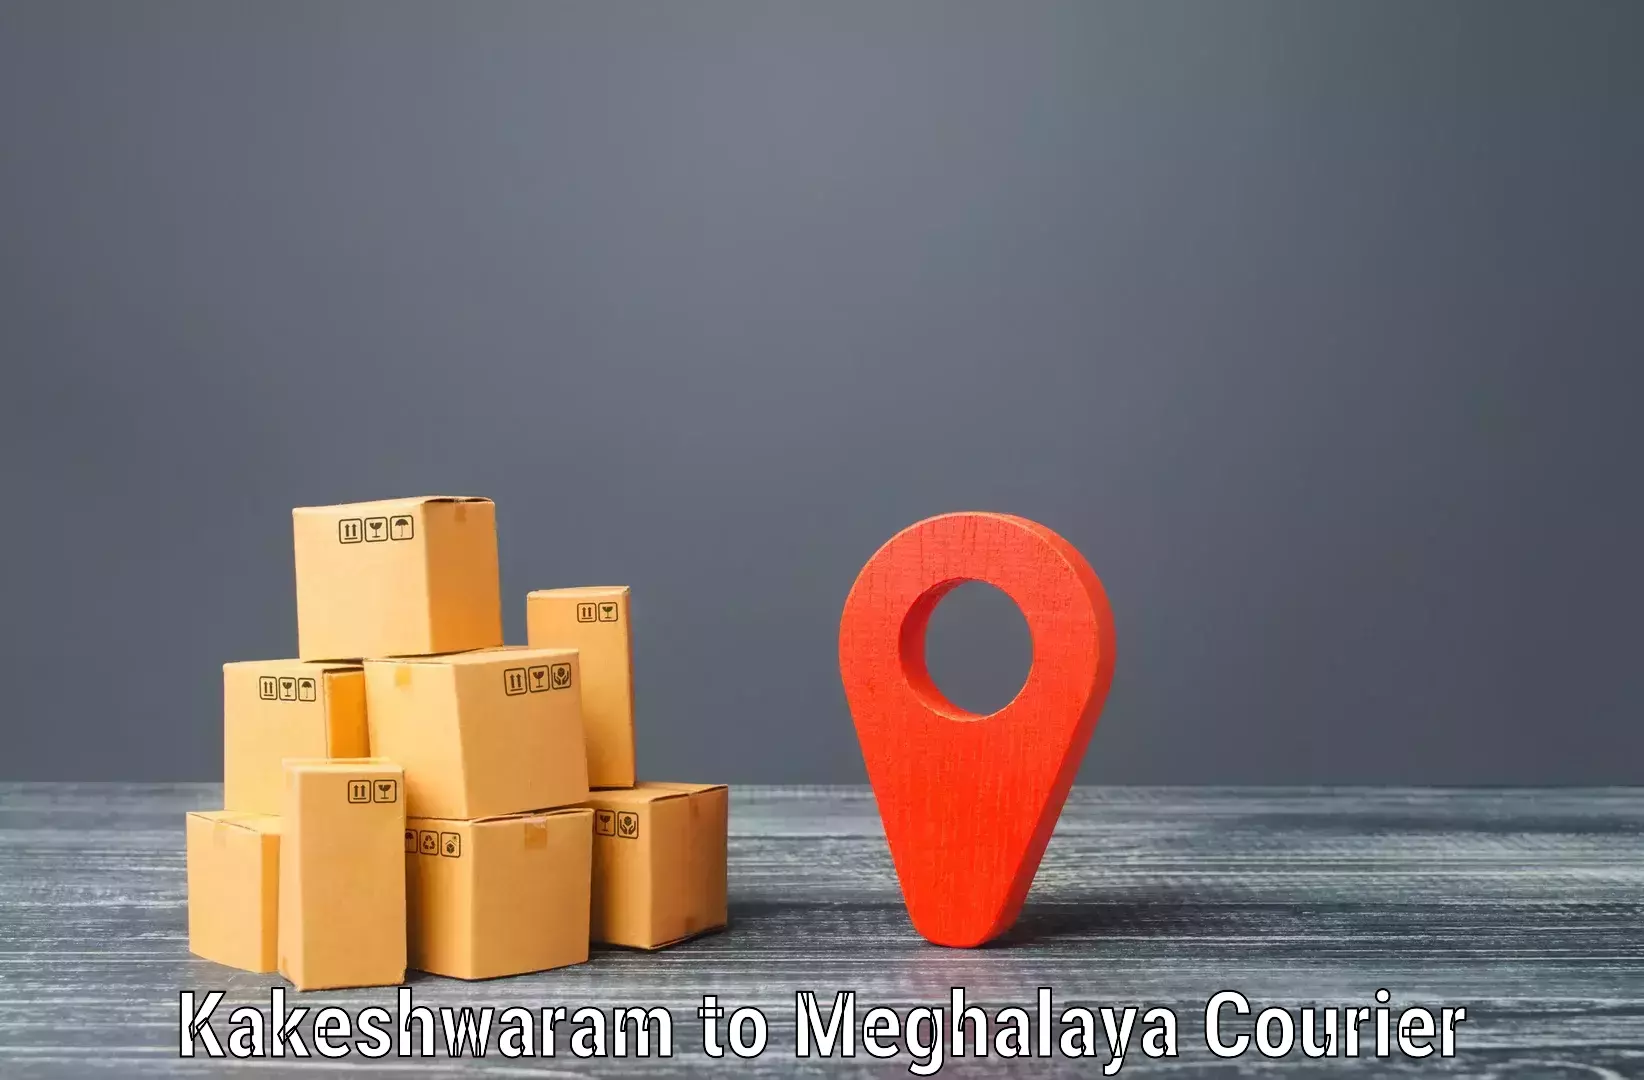 State-of-the-art courier technology Kakeshwaram to Nongpoh